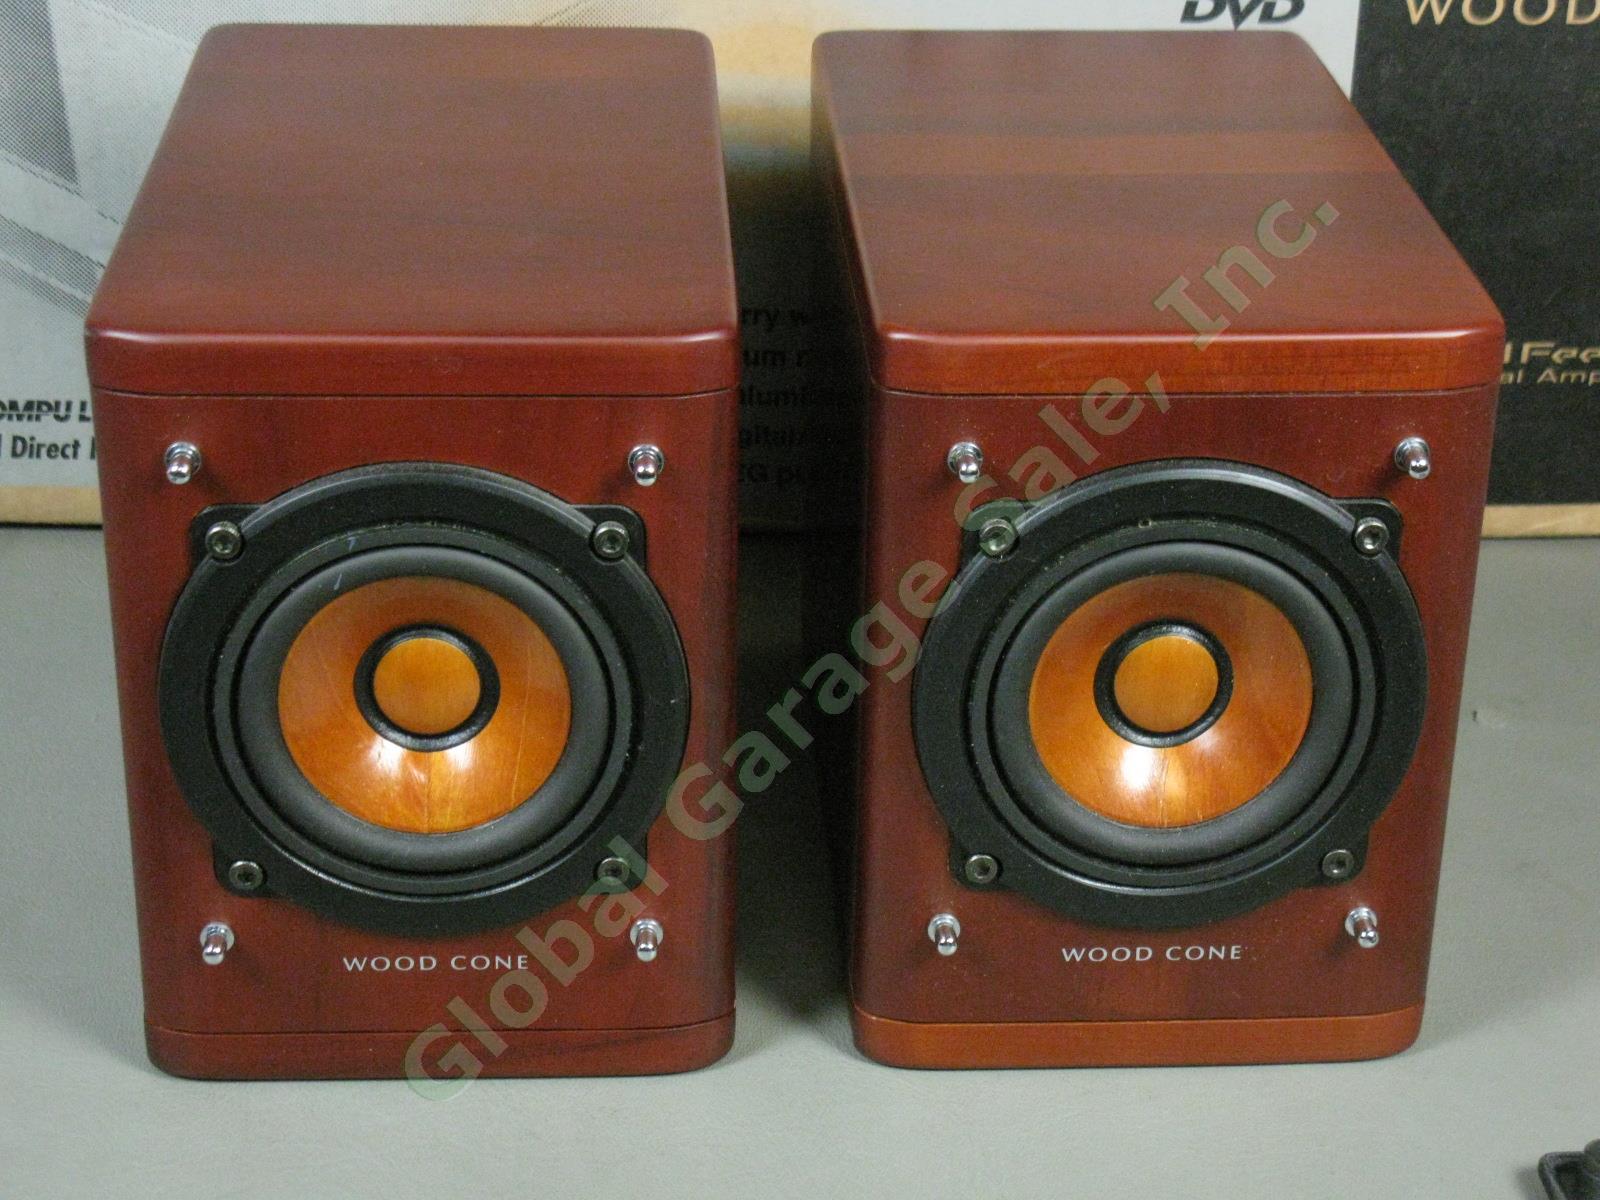 JVC EX-A1 Compact Stereo System DVD/CD Receiver Wood Cone Speakers Remote NR 4